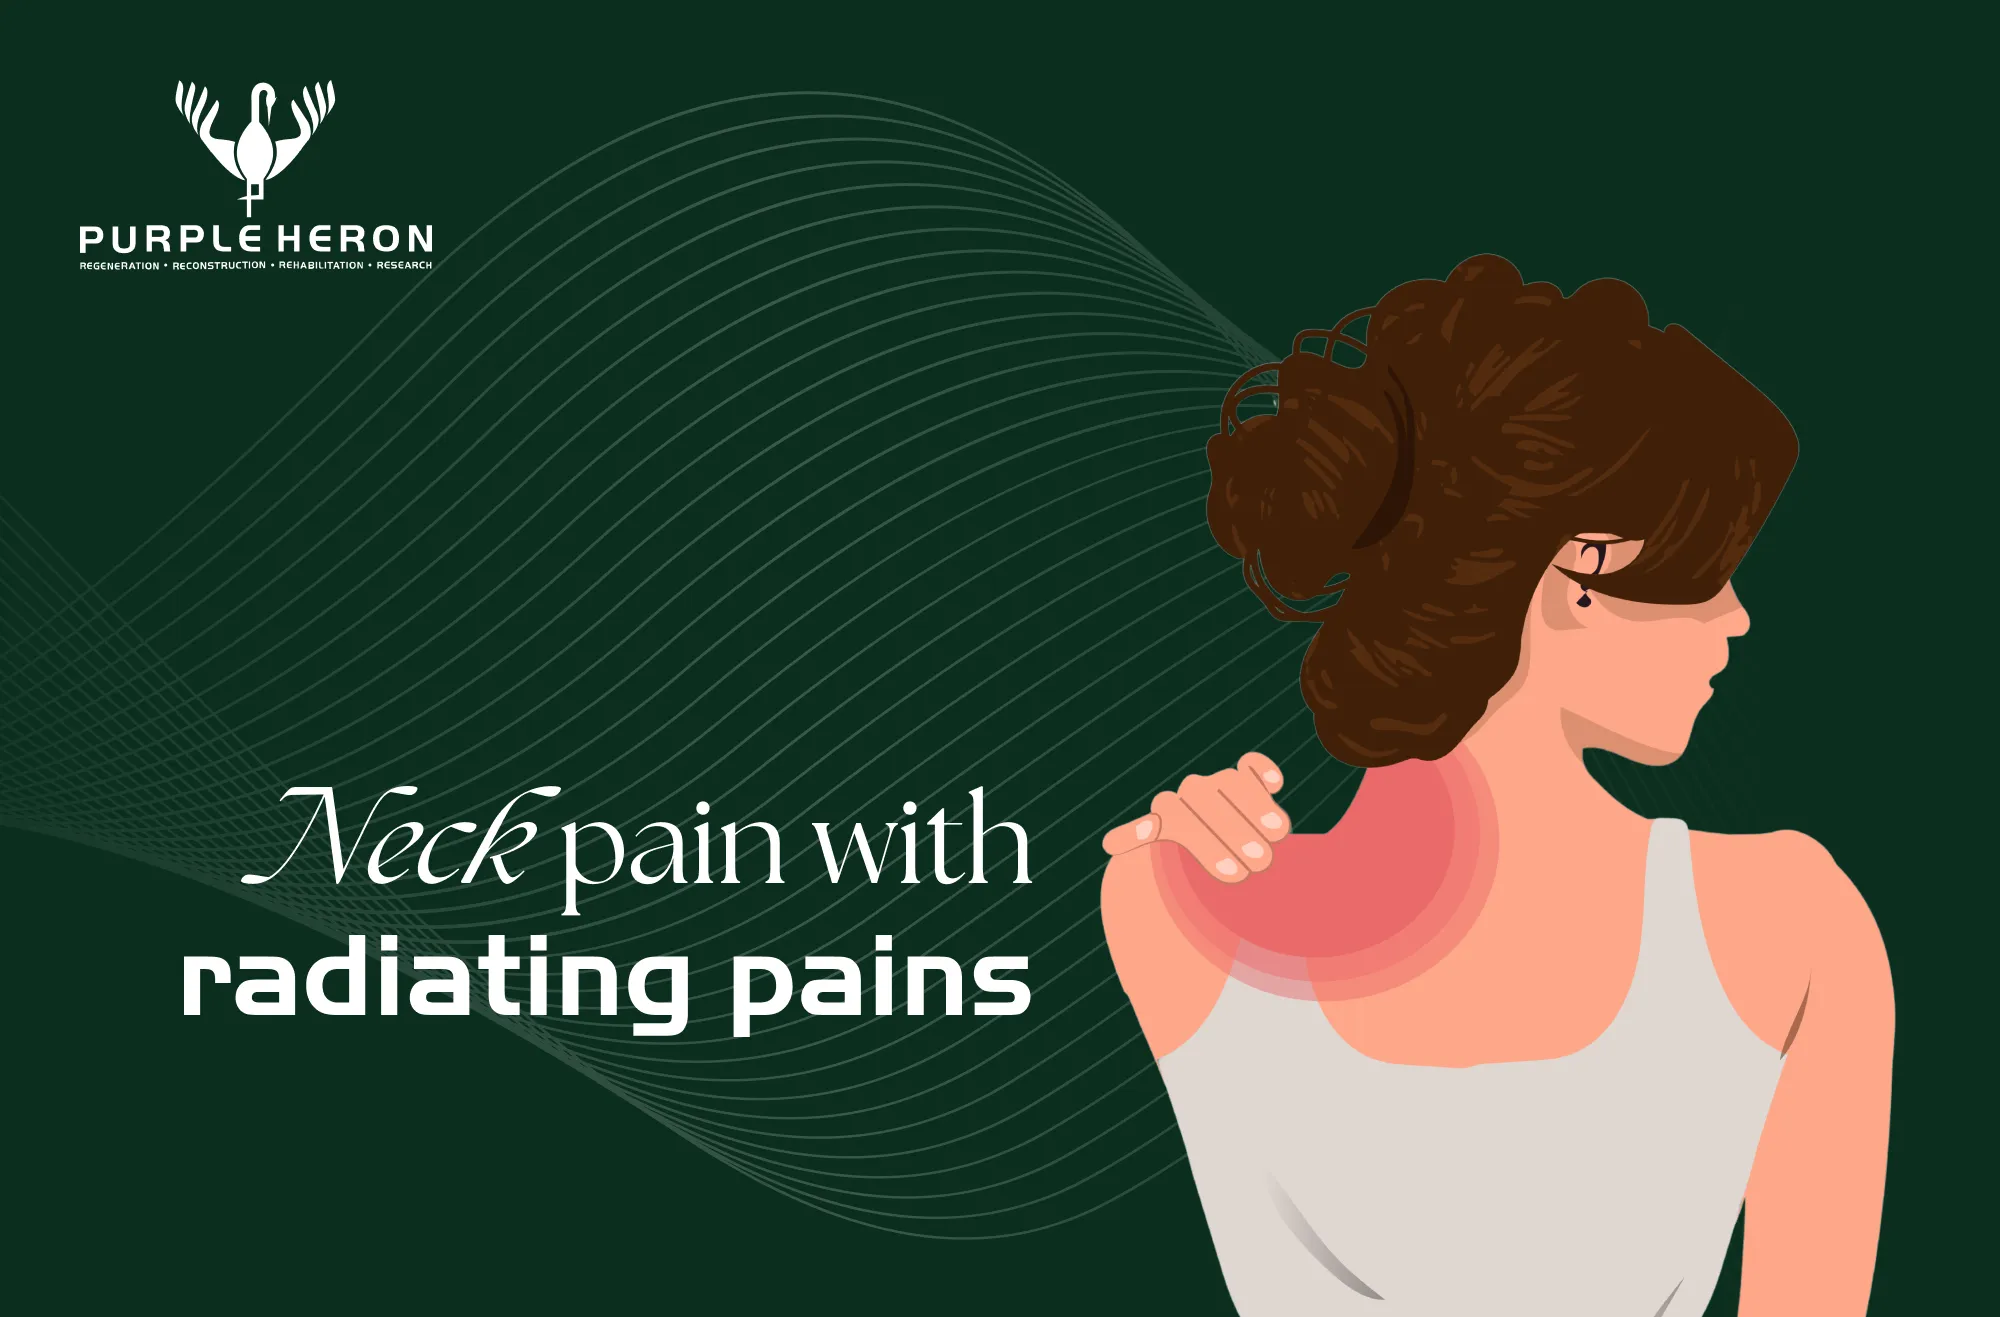 Neck pains with radiating pains image